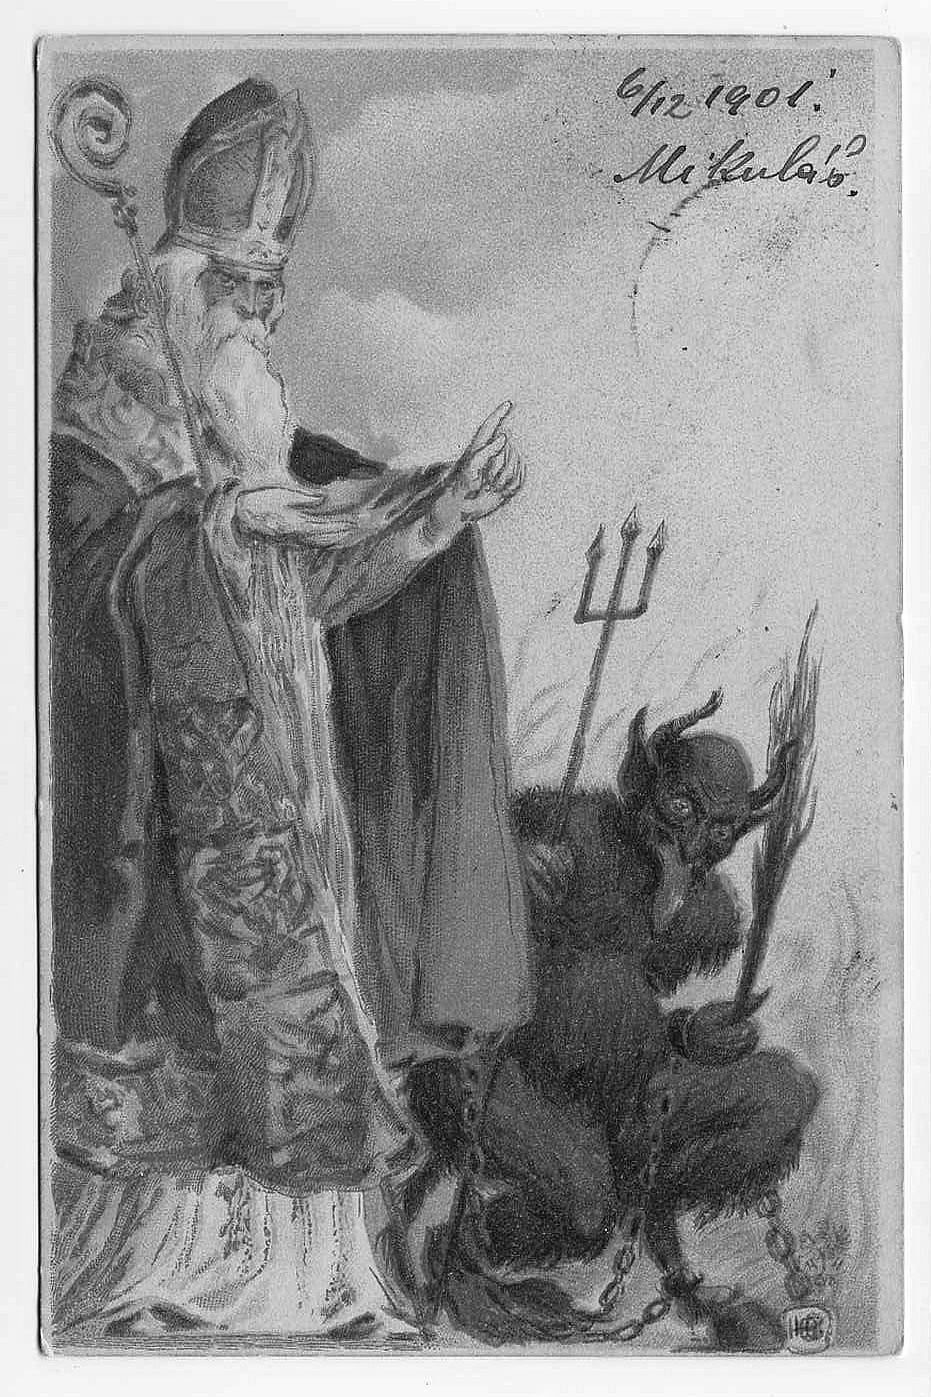 Greeting card dated to 1901 depicting Saint Nicholas in the full regalia of a Catholic bishop with Krampus by his side. Krampus is shown as a furry, black monster with horns, cloven hooves, a long dangling tongue, and chains on his arms, carrying a pitchfork and a bundle of birch sticks for beating children.